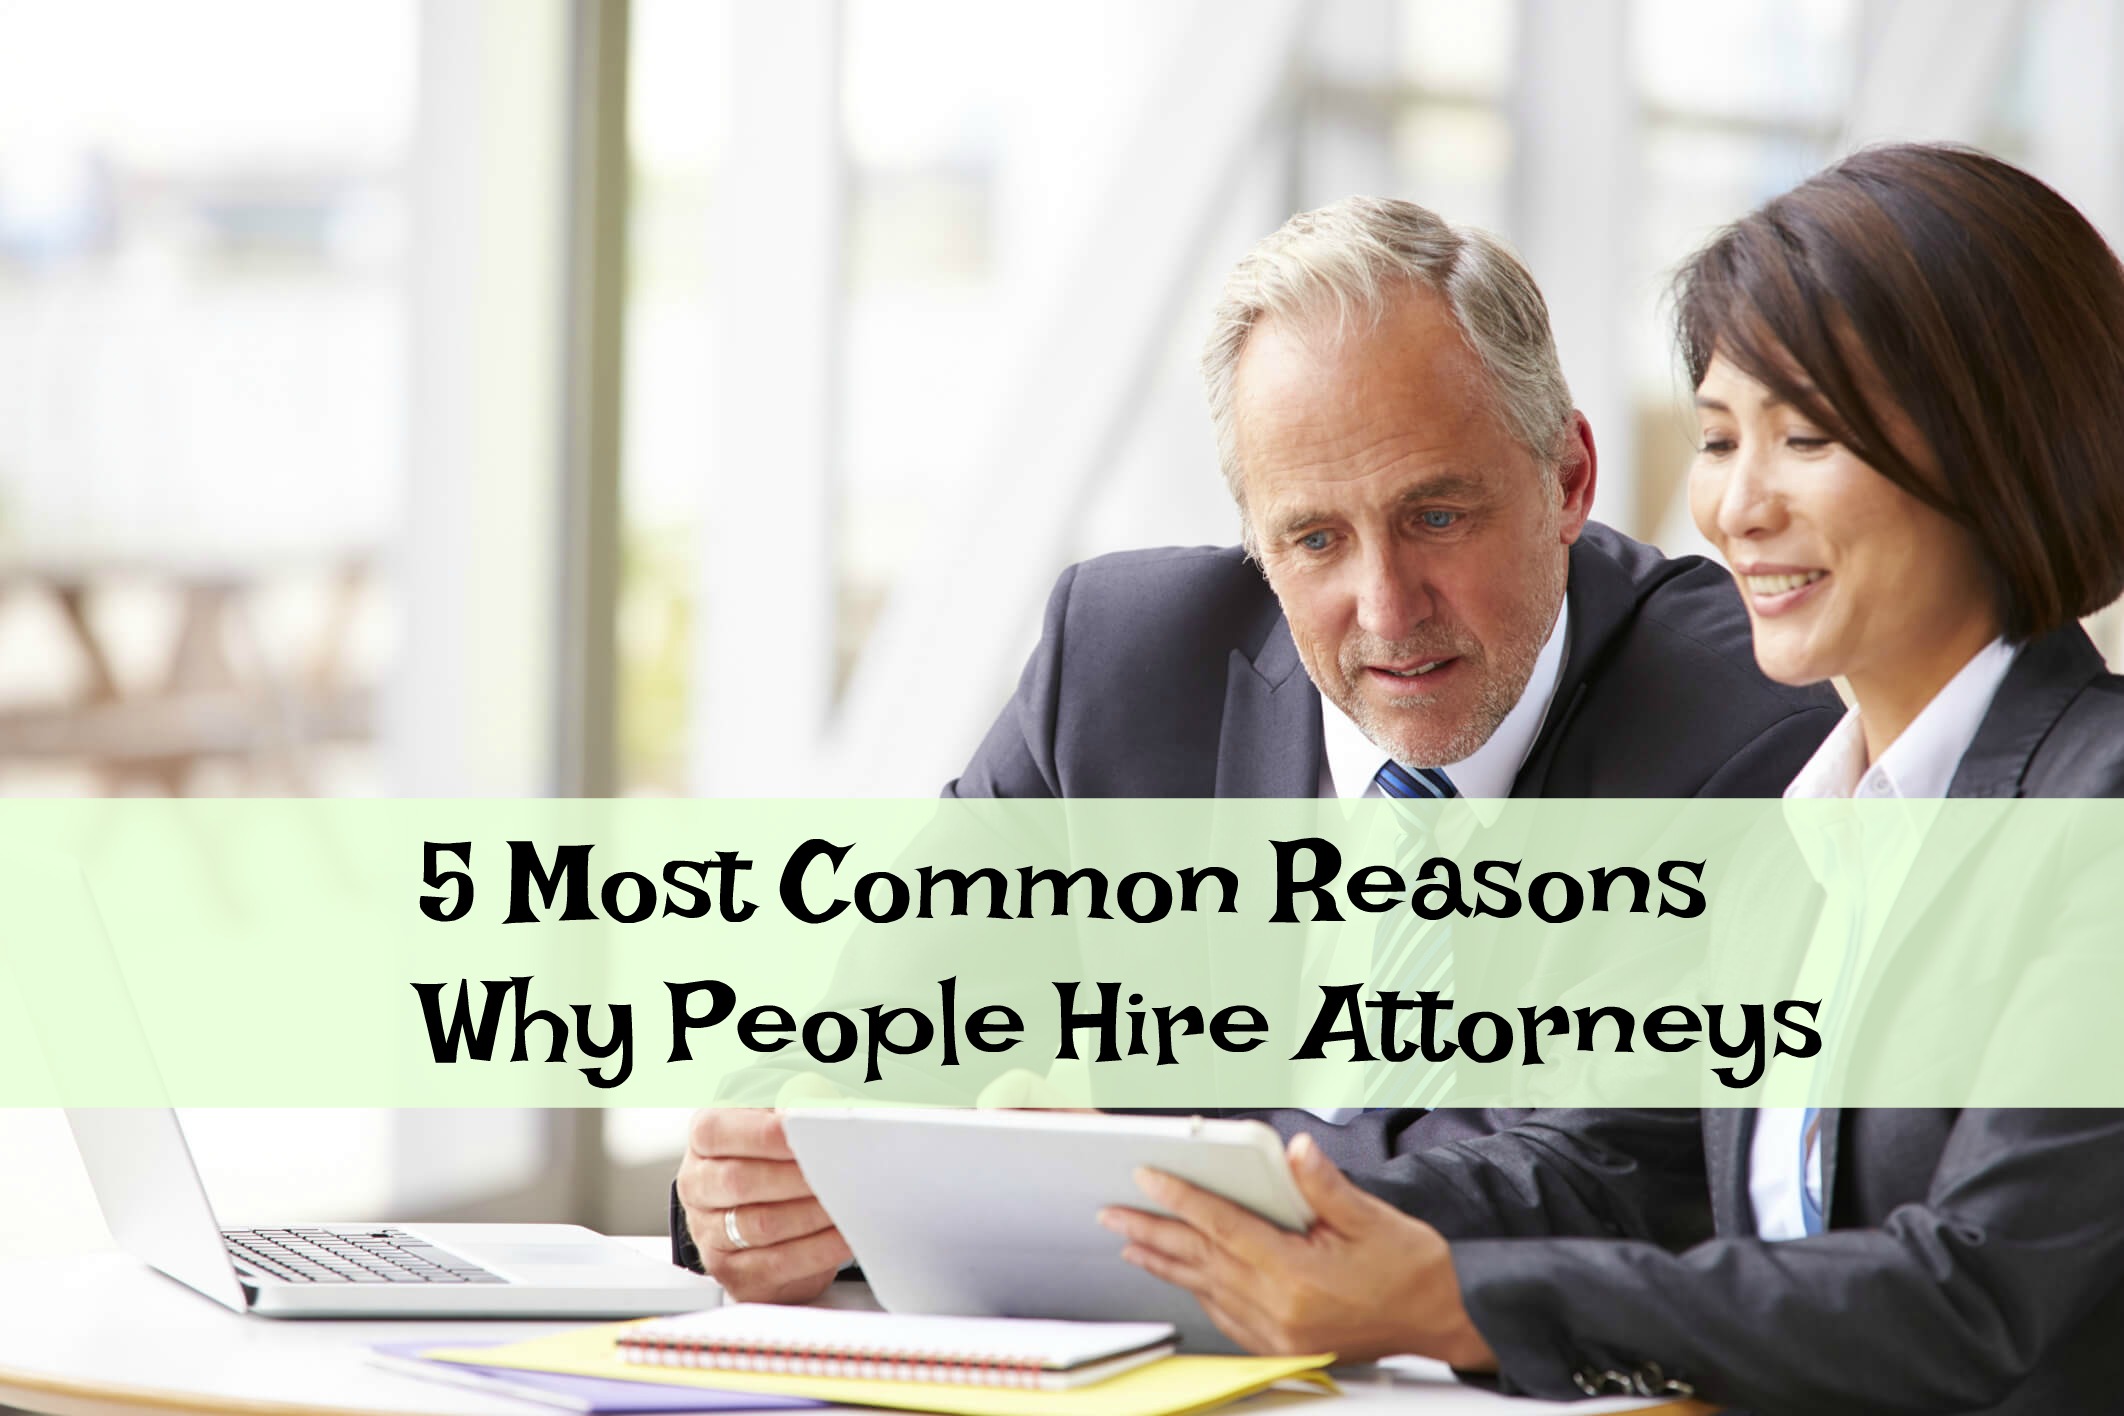 5 Most Common Reasons Why People Hire Attorneys